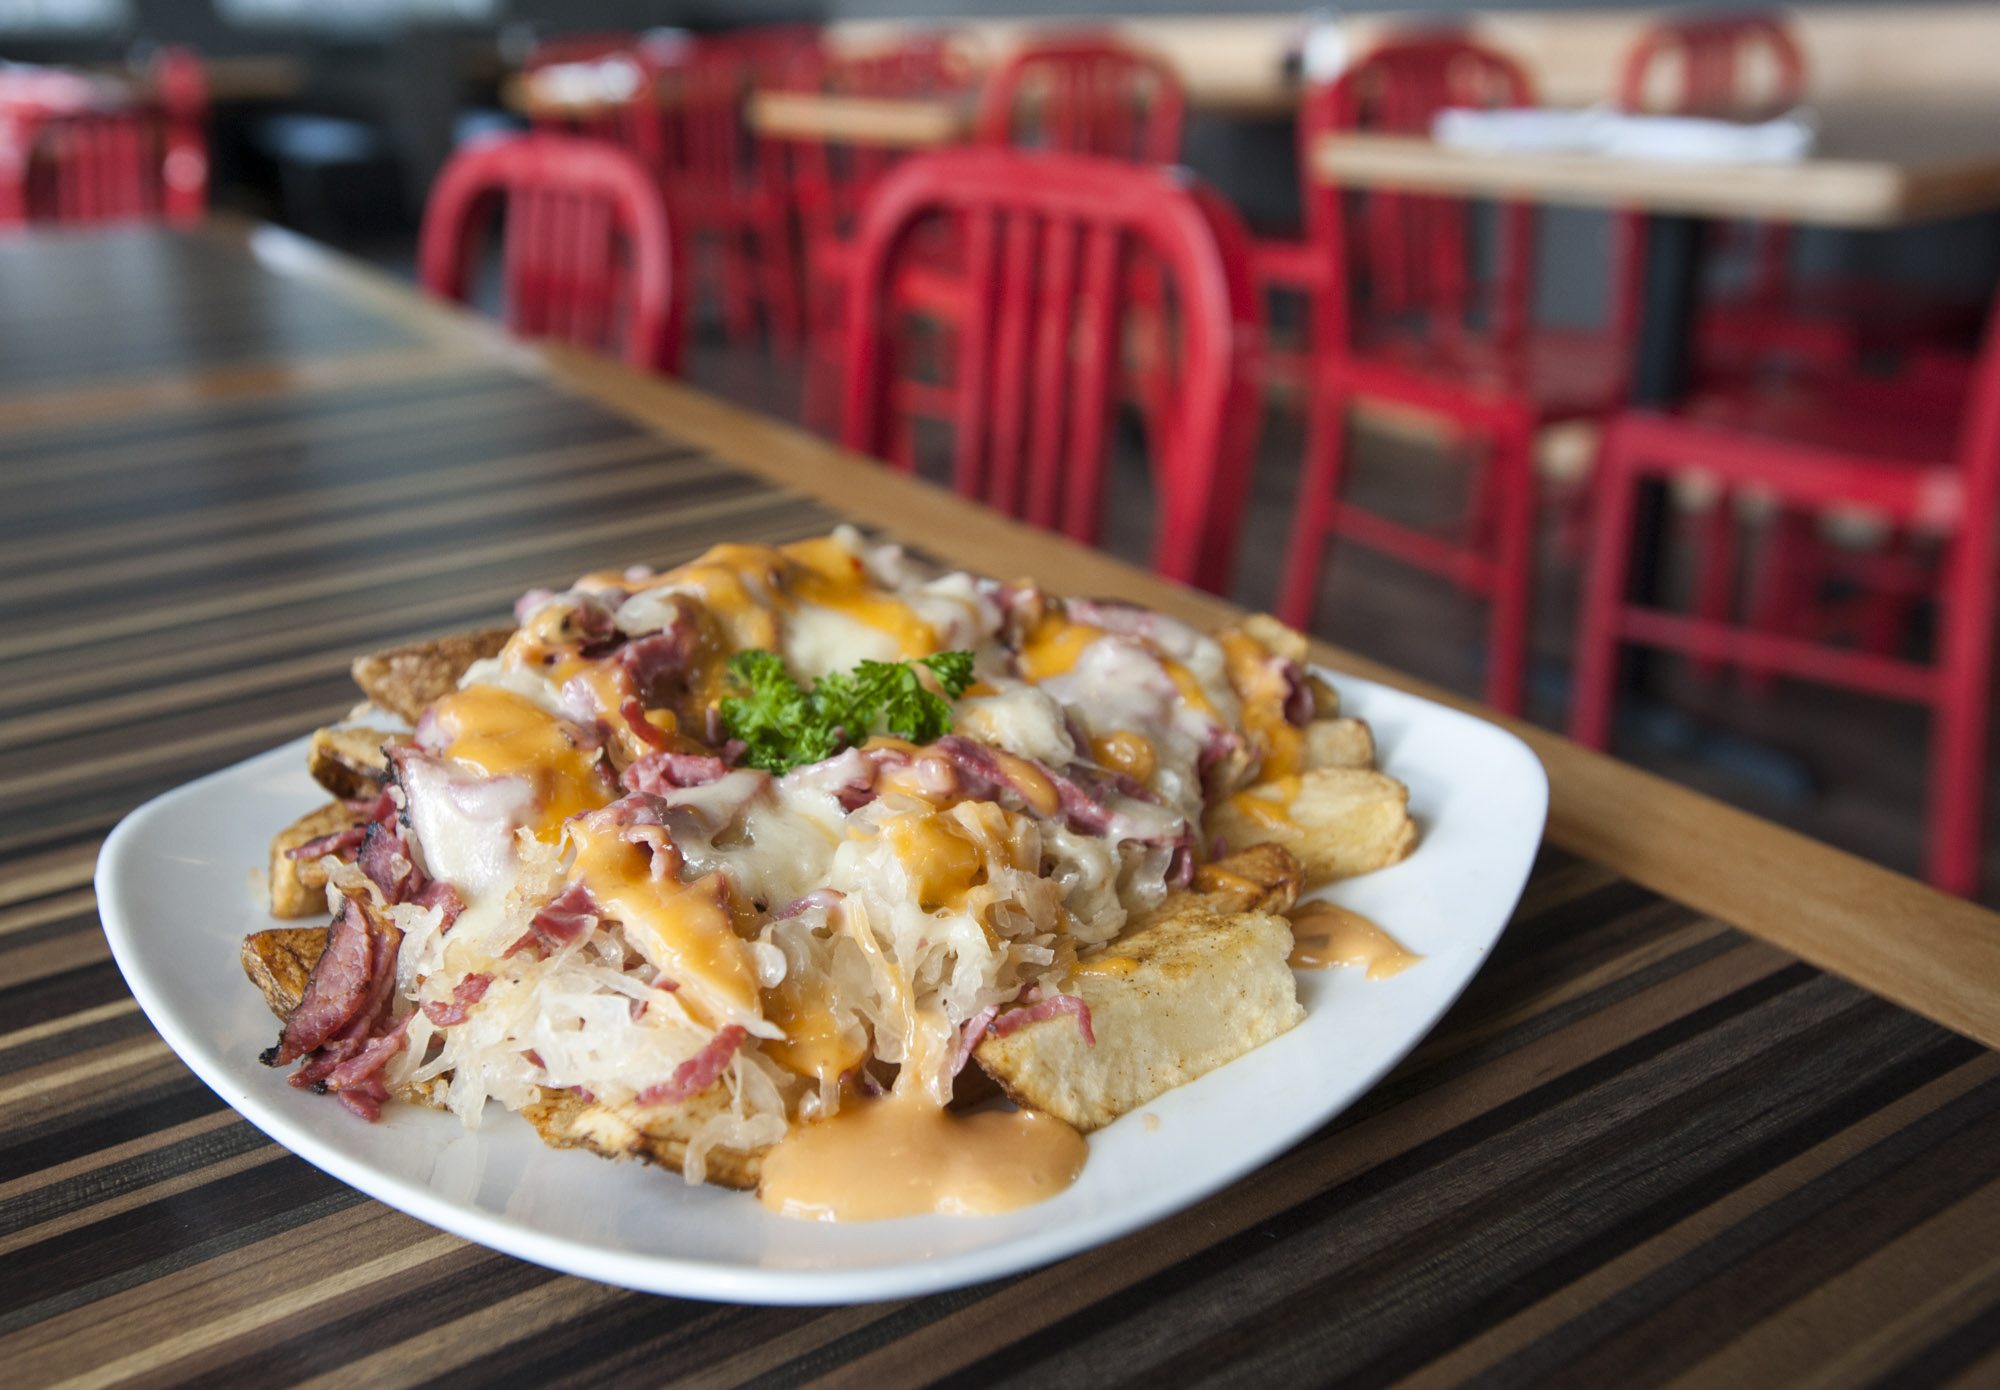 Pastrami fries at Rose&#039;s Restaurant, Bakery and Bar in Vancouver are hearty enough to pair with a salad to make a meal.